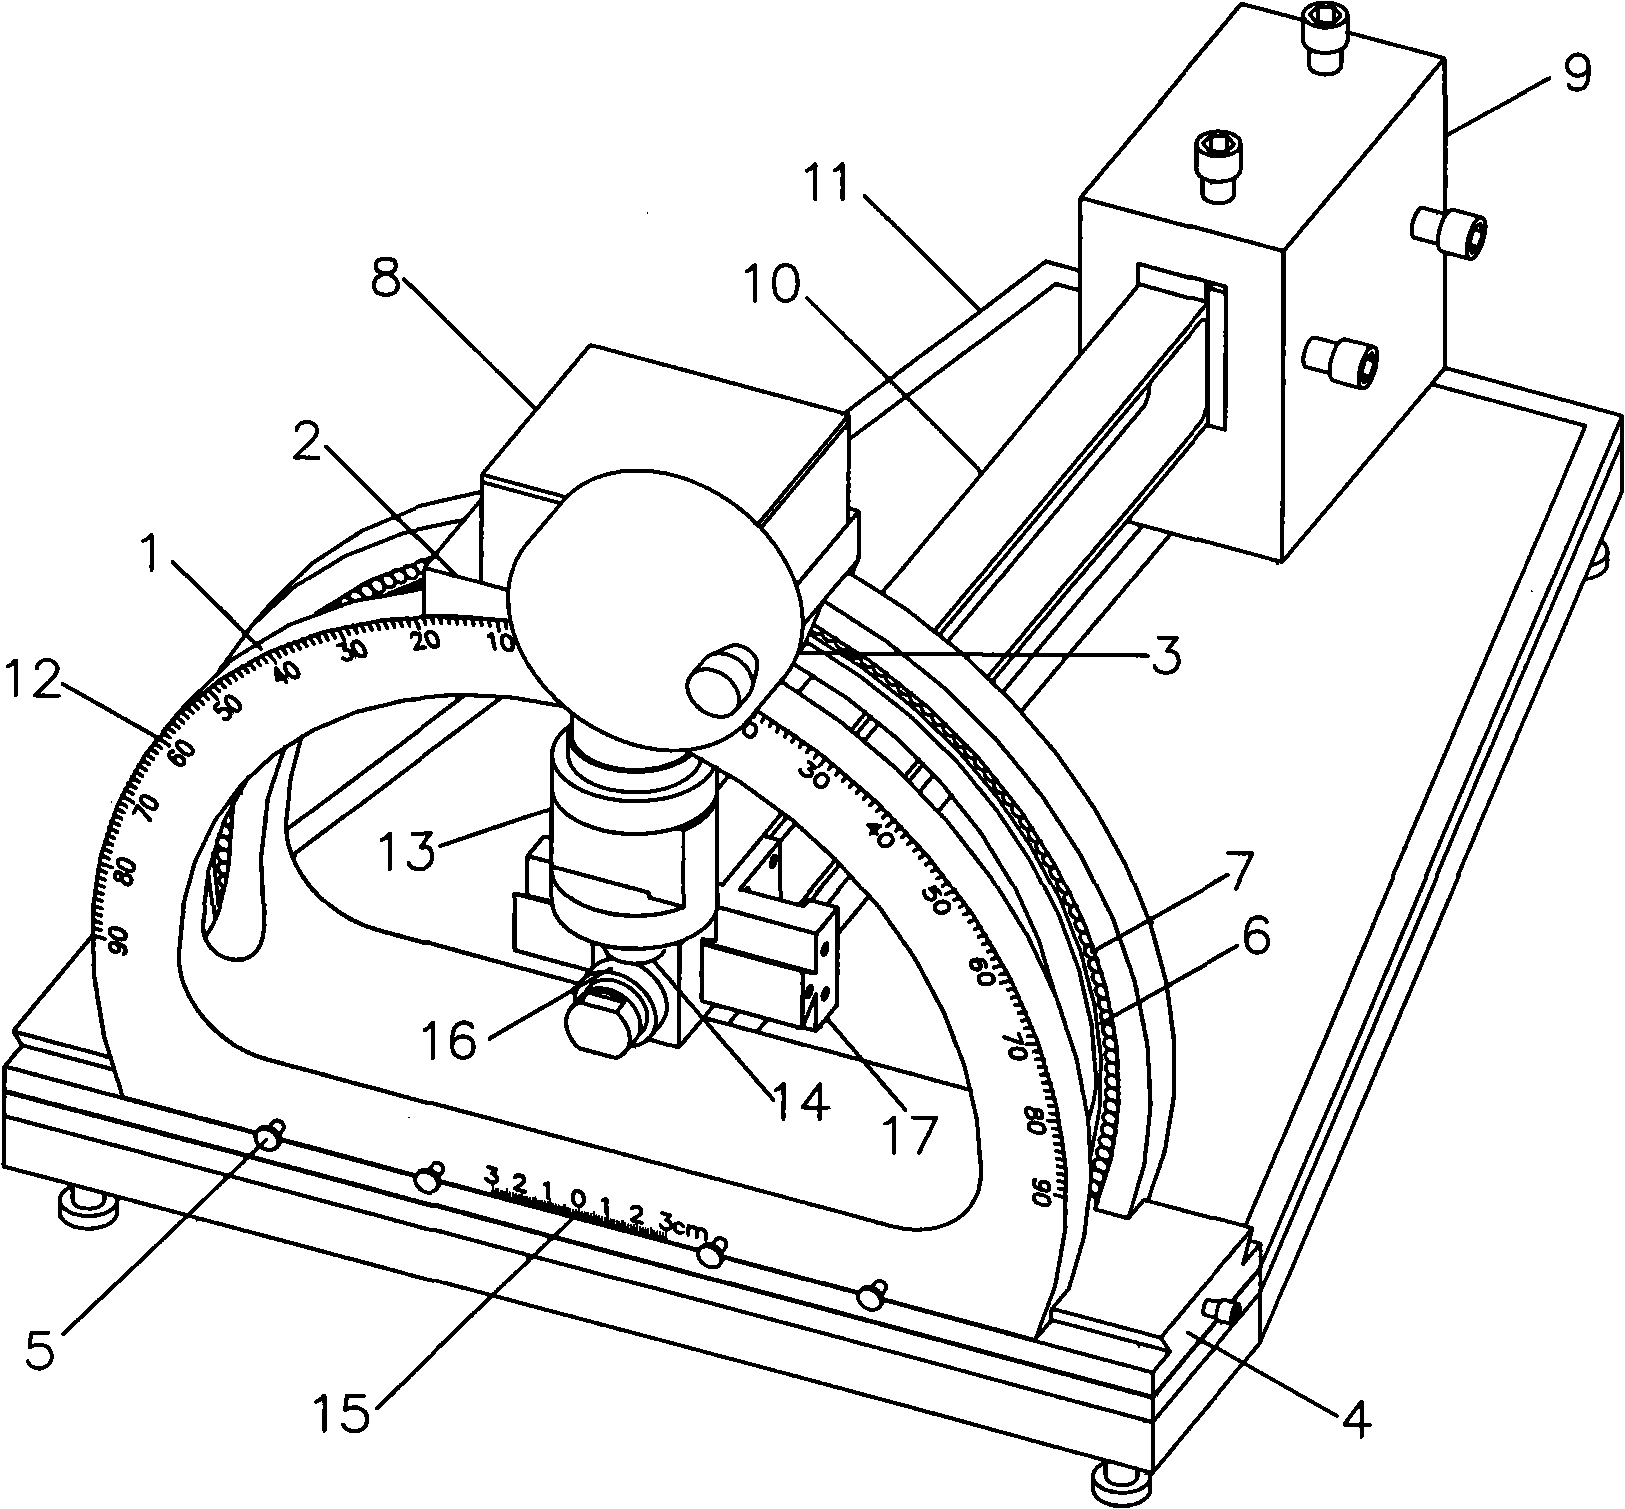 Movable type loading device in any direction